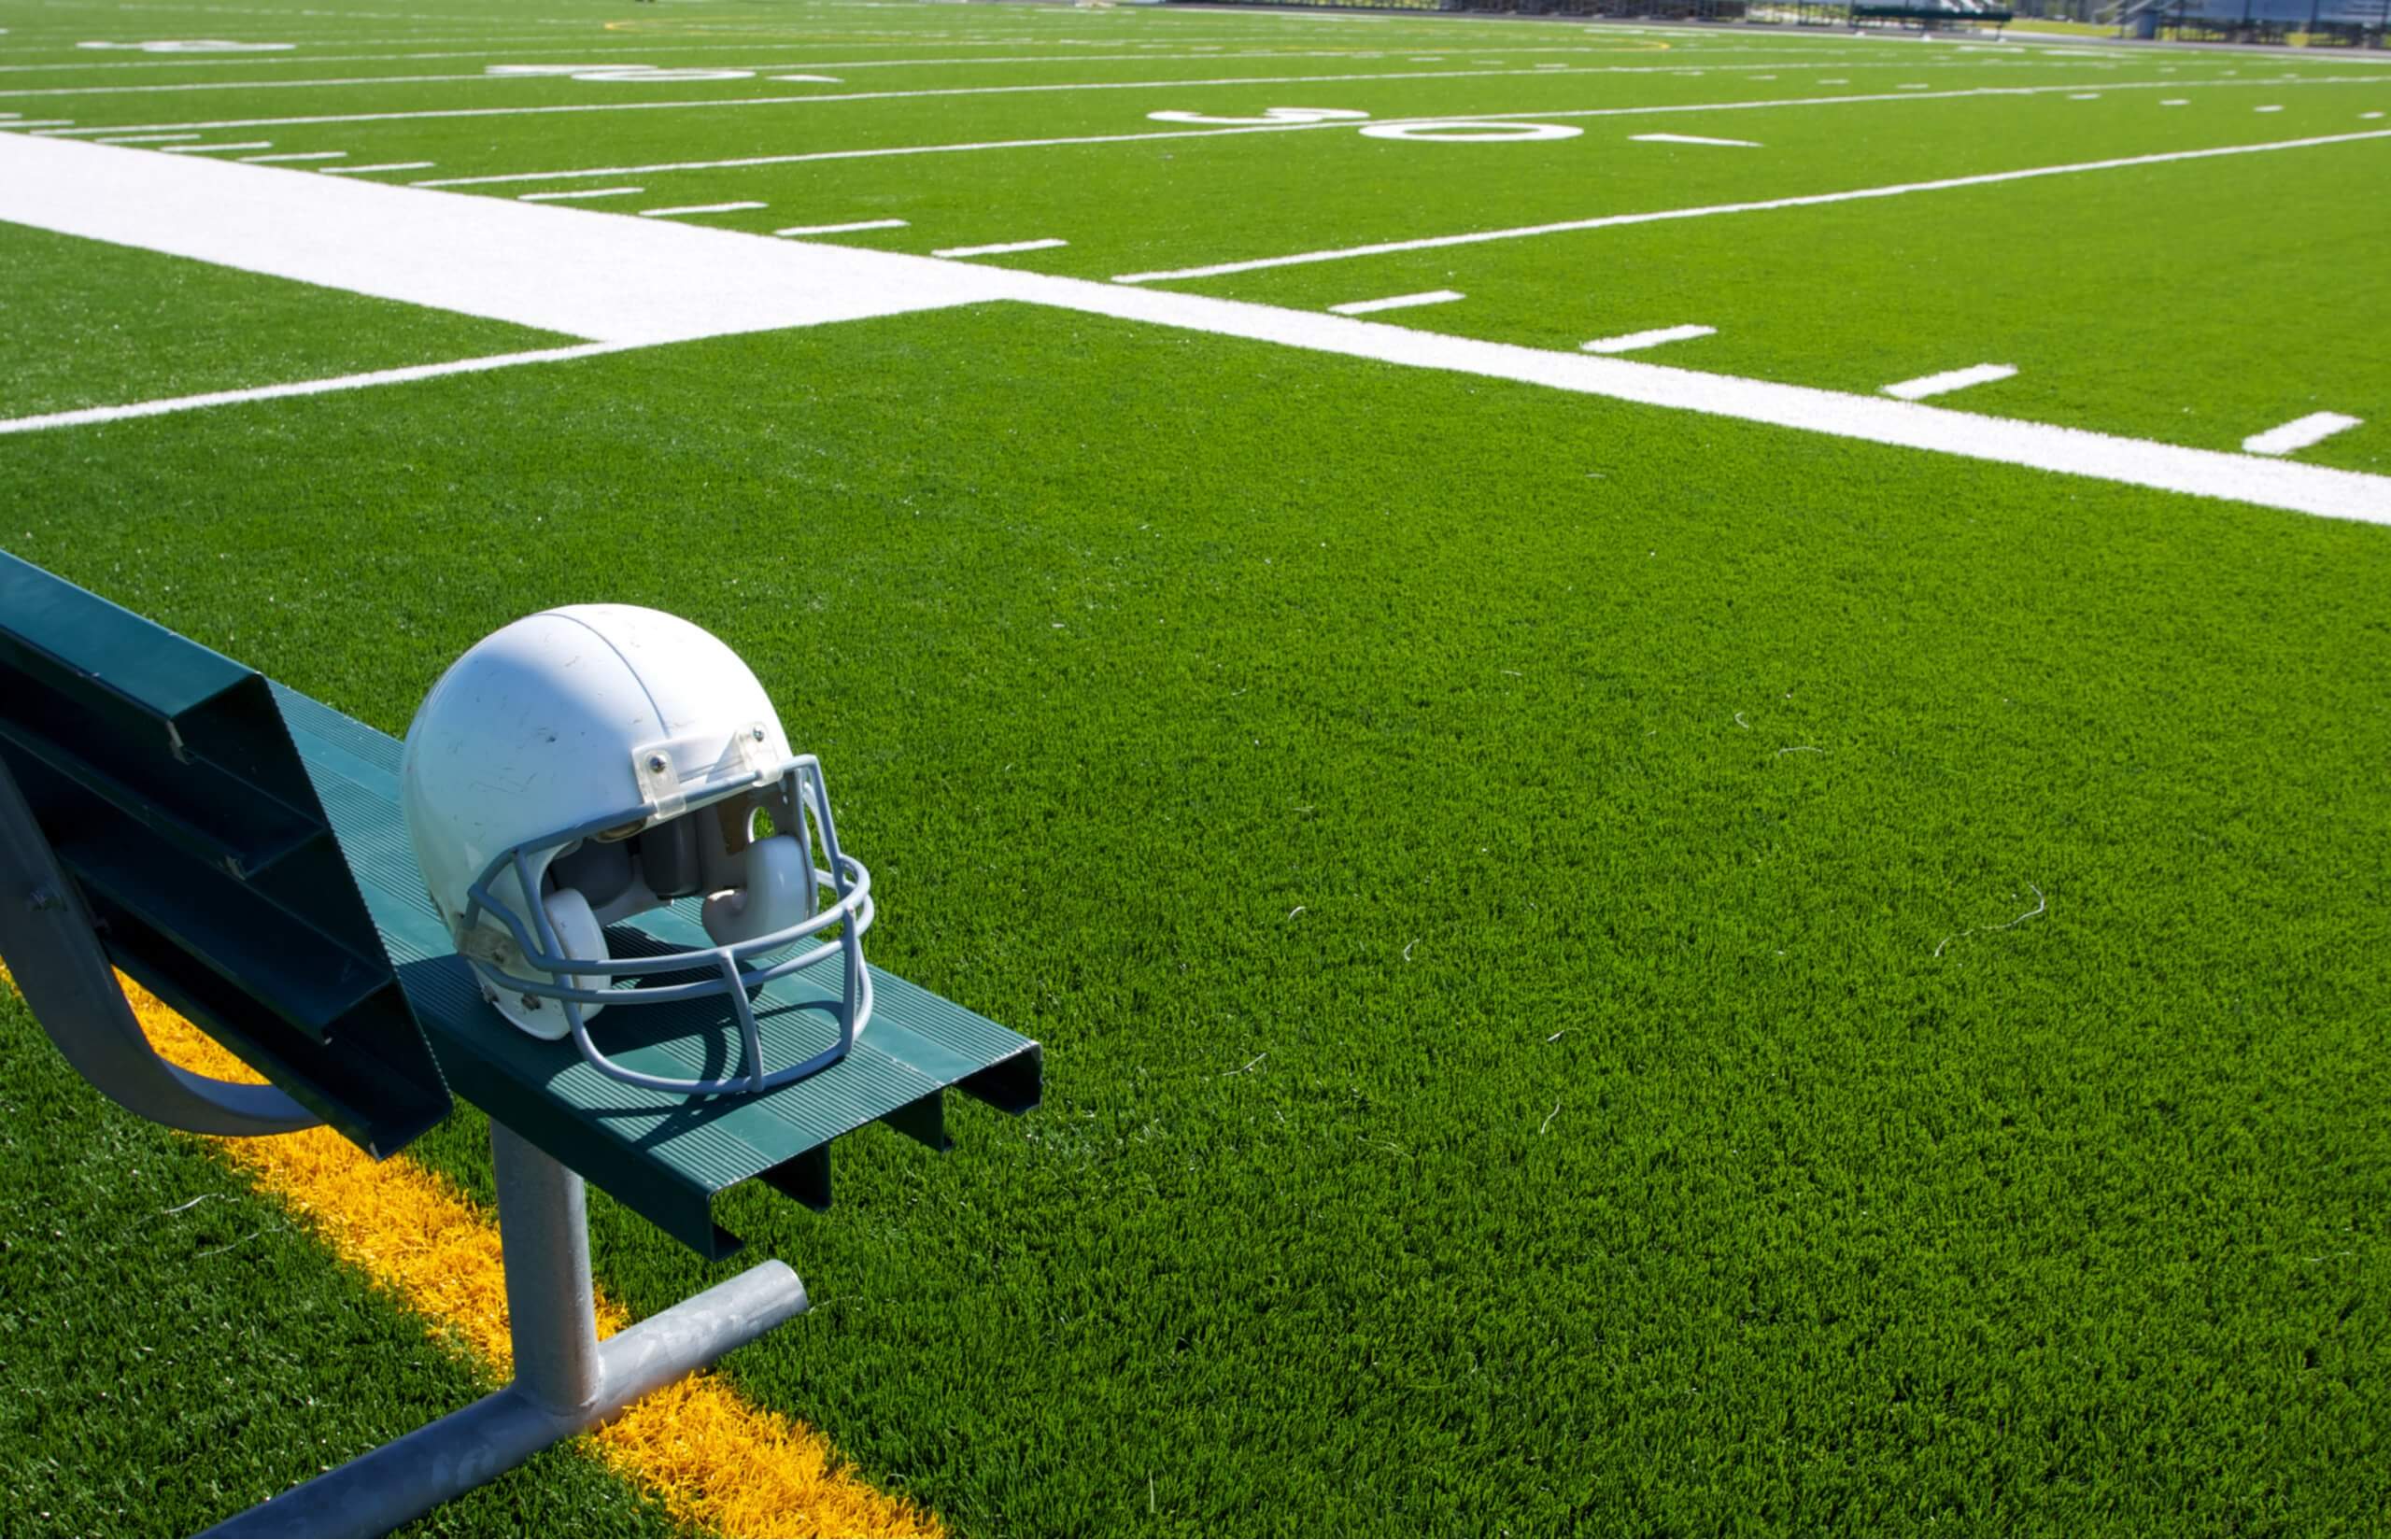 American Football Helmet on the Bench with the field beyond